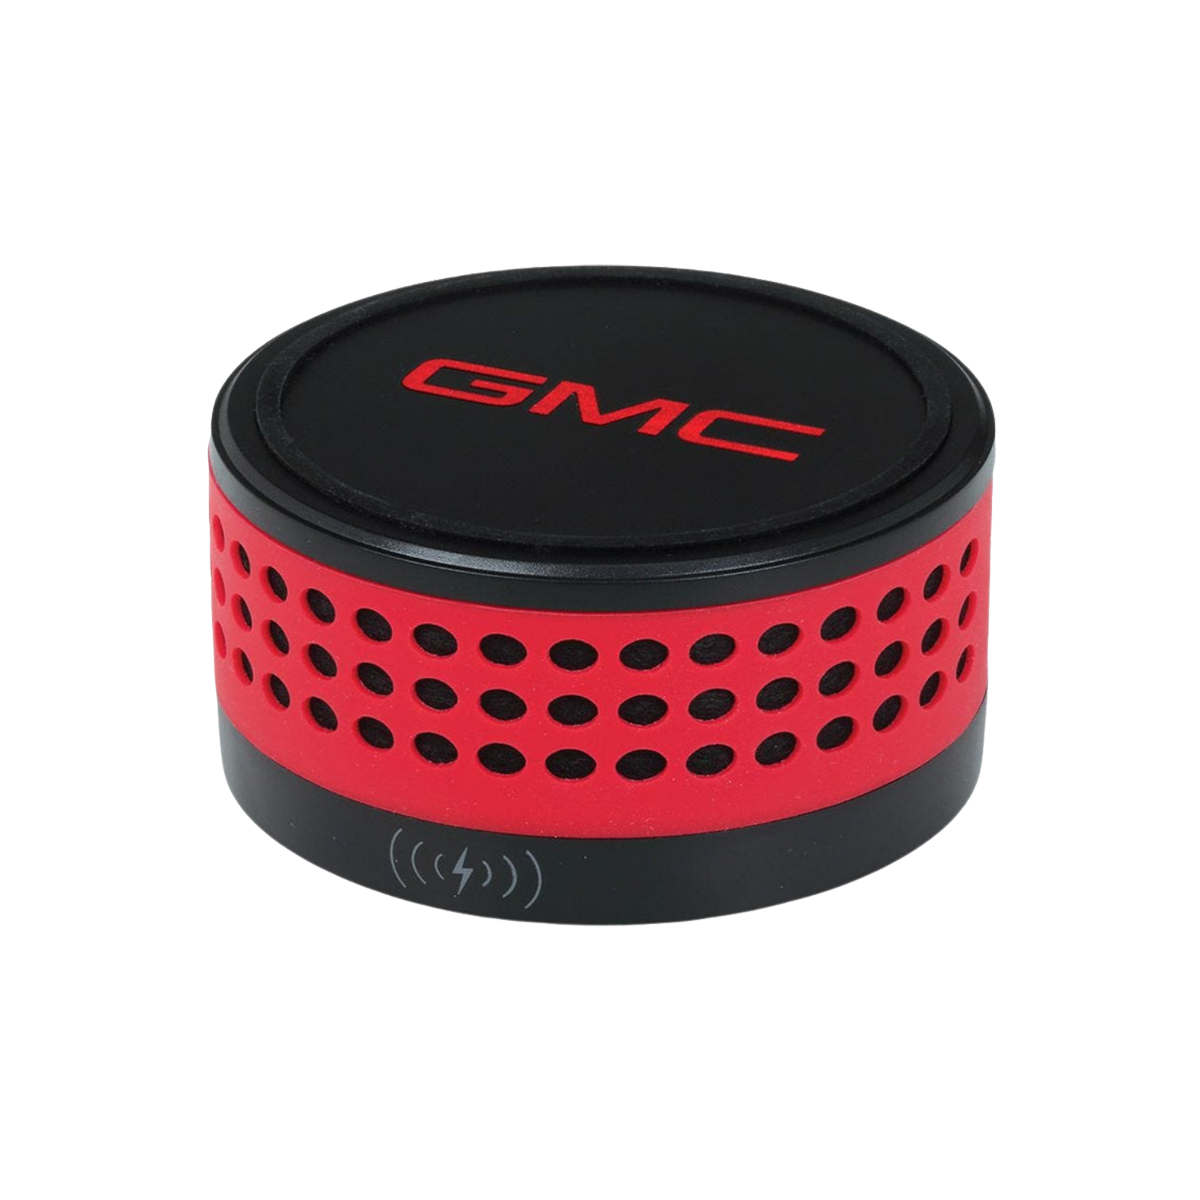 GMC 2-IN-1 Wireless Charger and Speaker